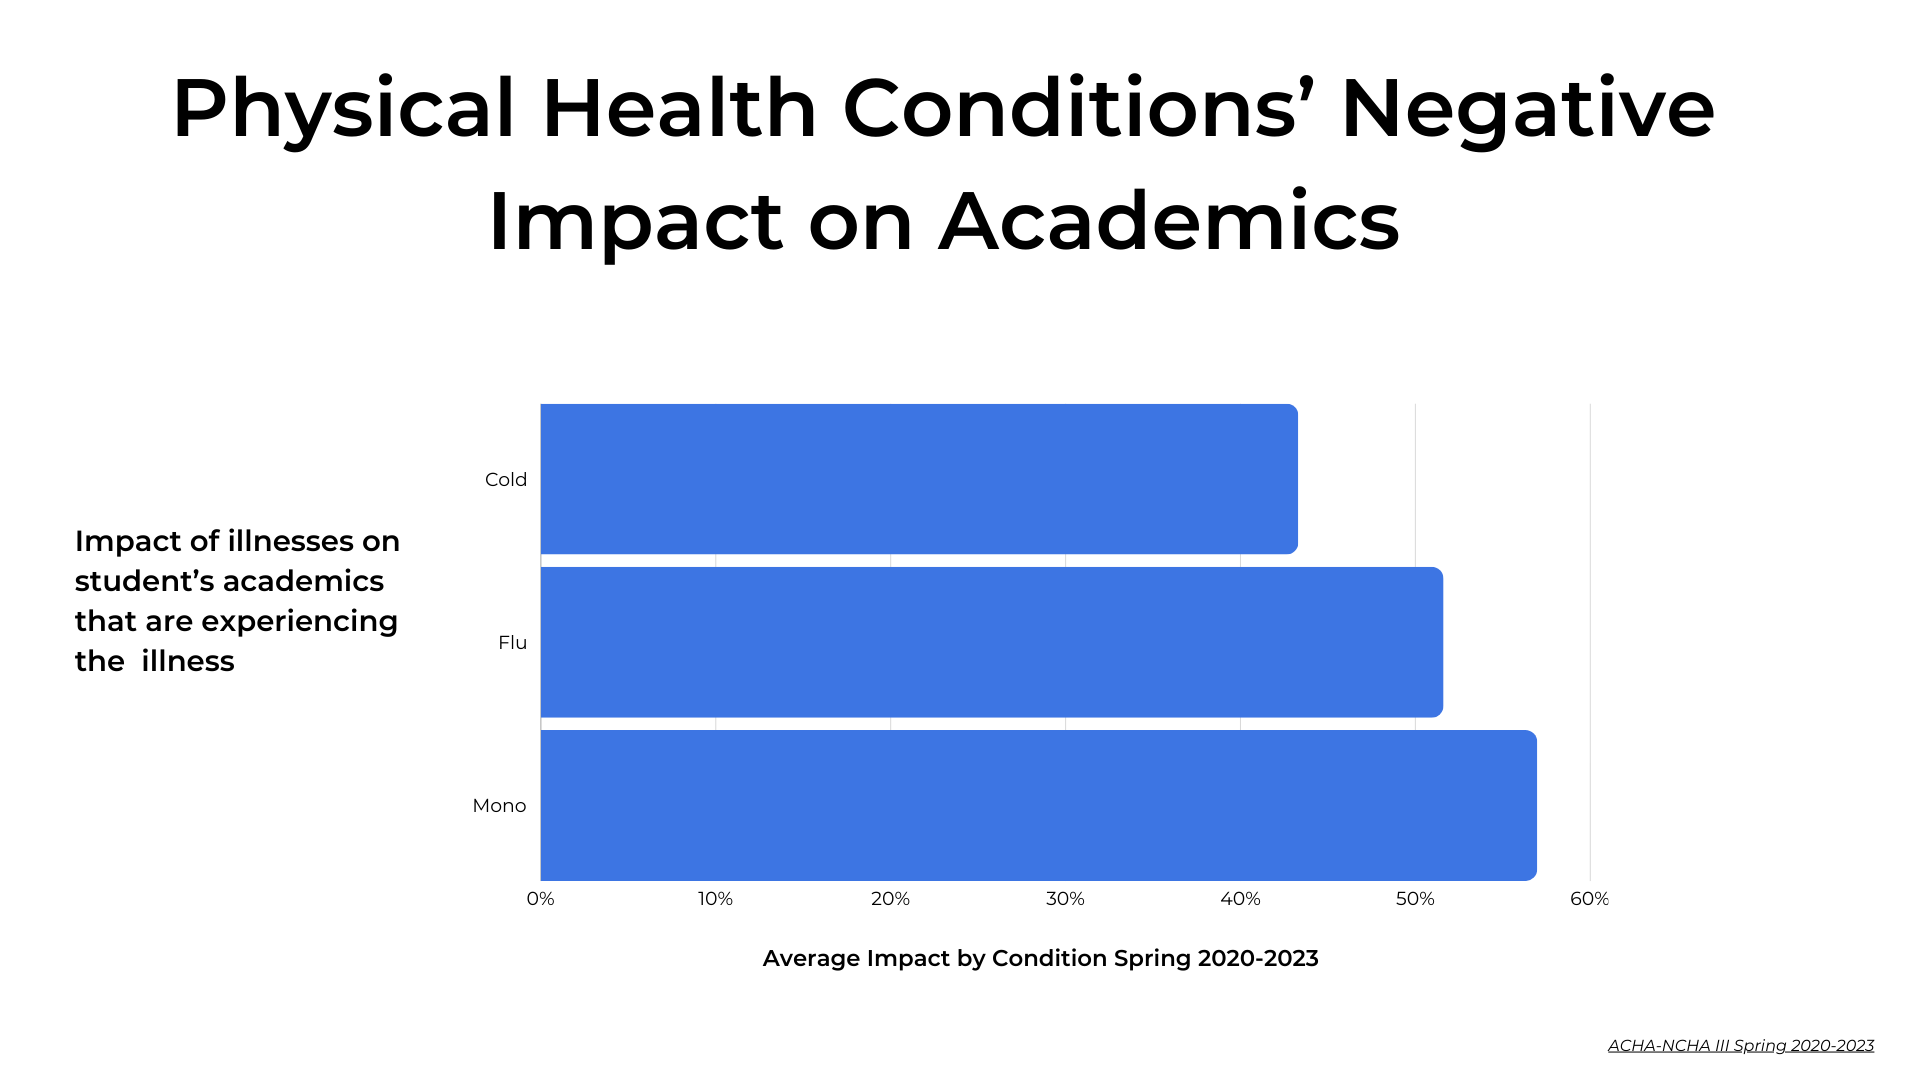 Physical Health Conditions' Negative Impact on Academics: Impact of illness on student's academics that are experiencing the illness. Average Impact by Condition Spring 2020-2023: Cold over 40%; Flu over 50%; Mono over 55%.